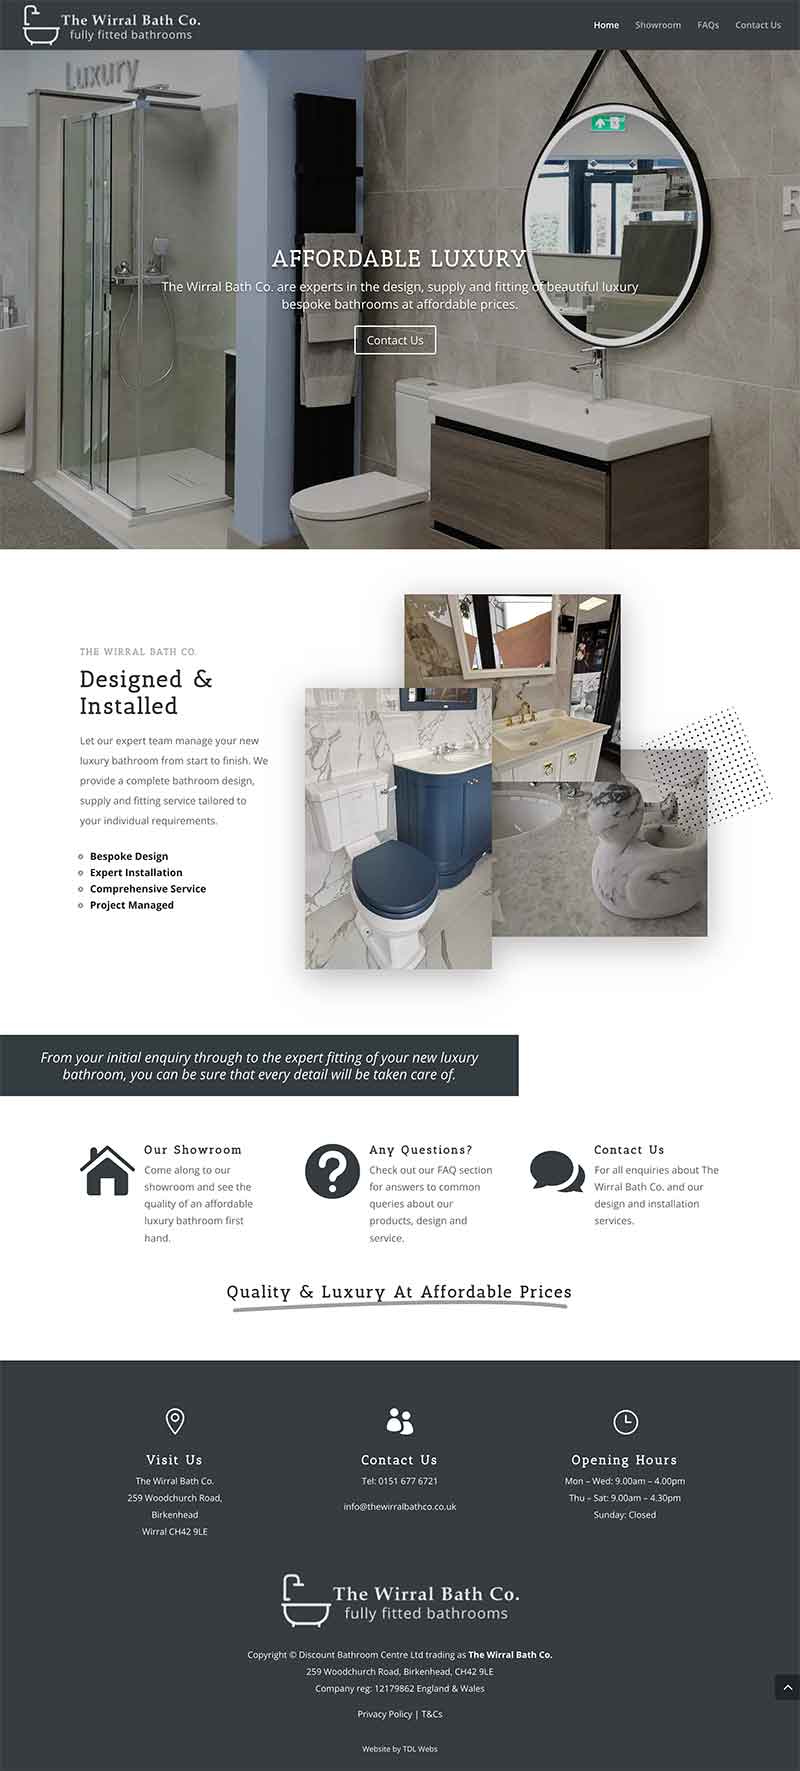 Full length screenshot of The Wirral Bath Co. website home page